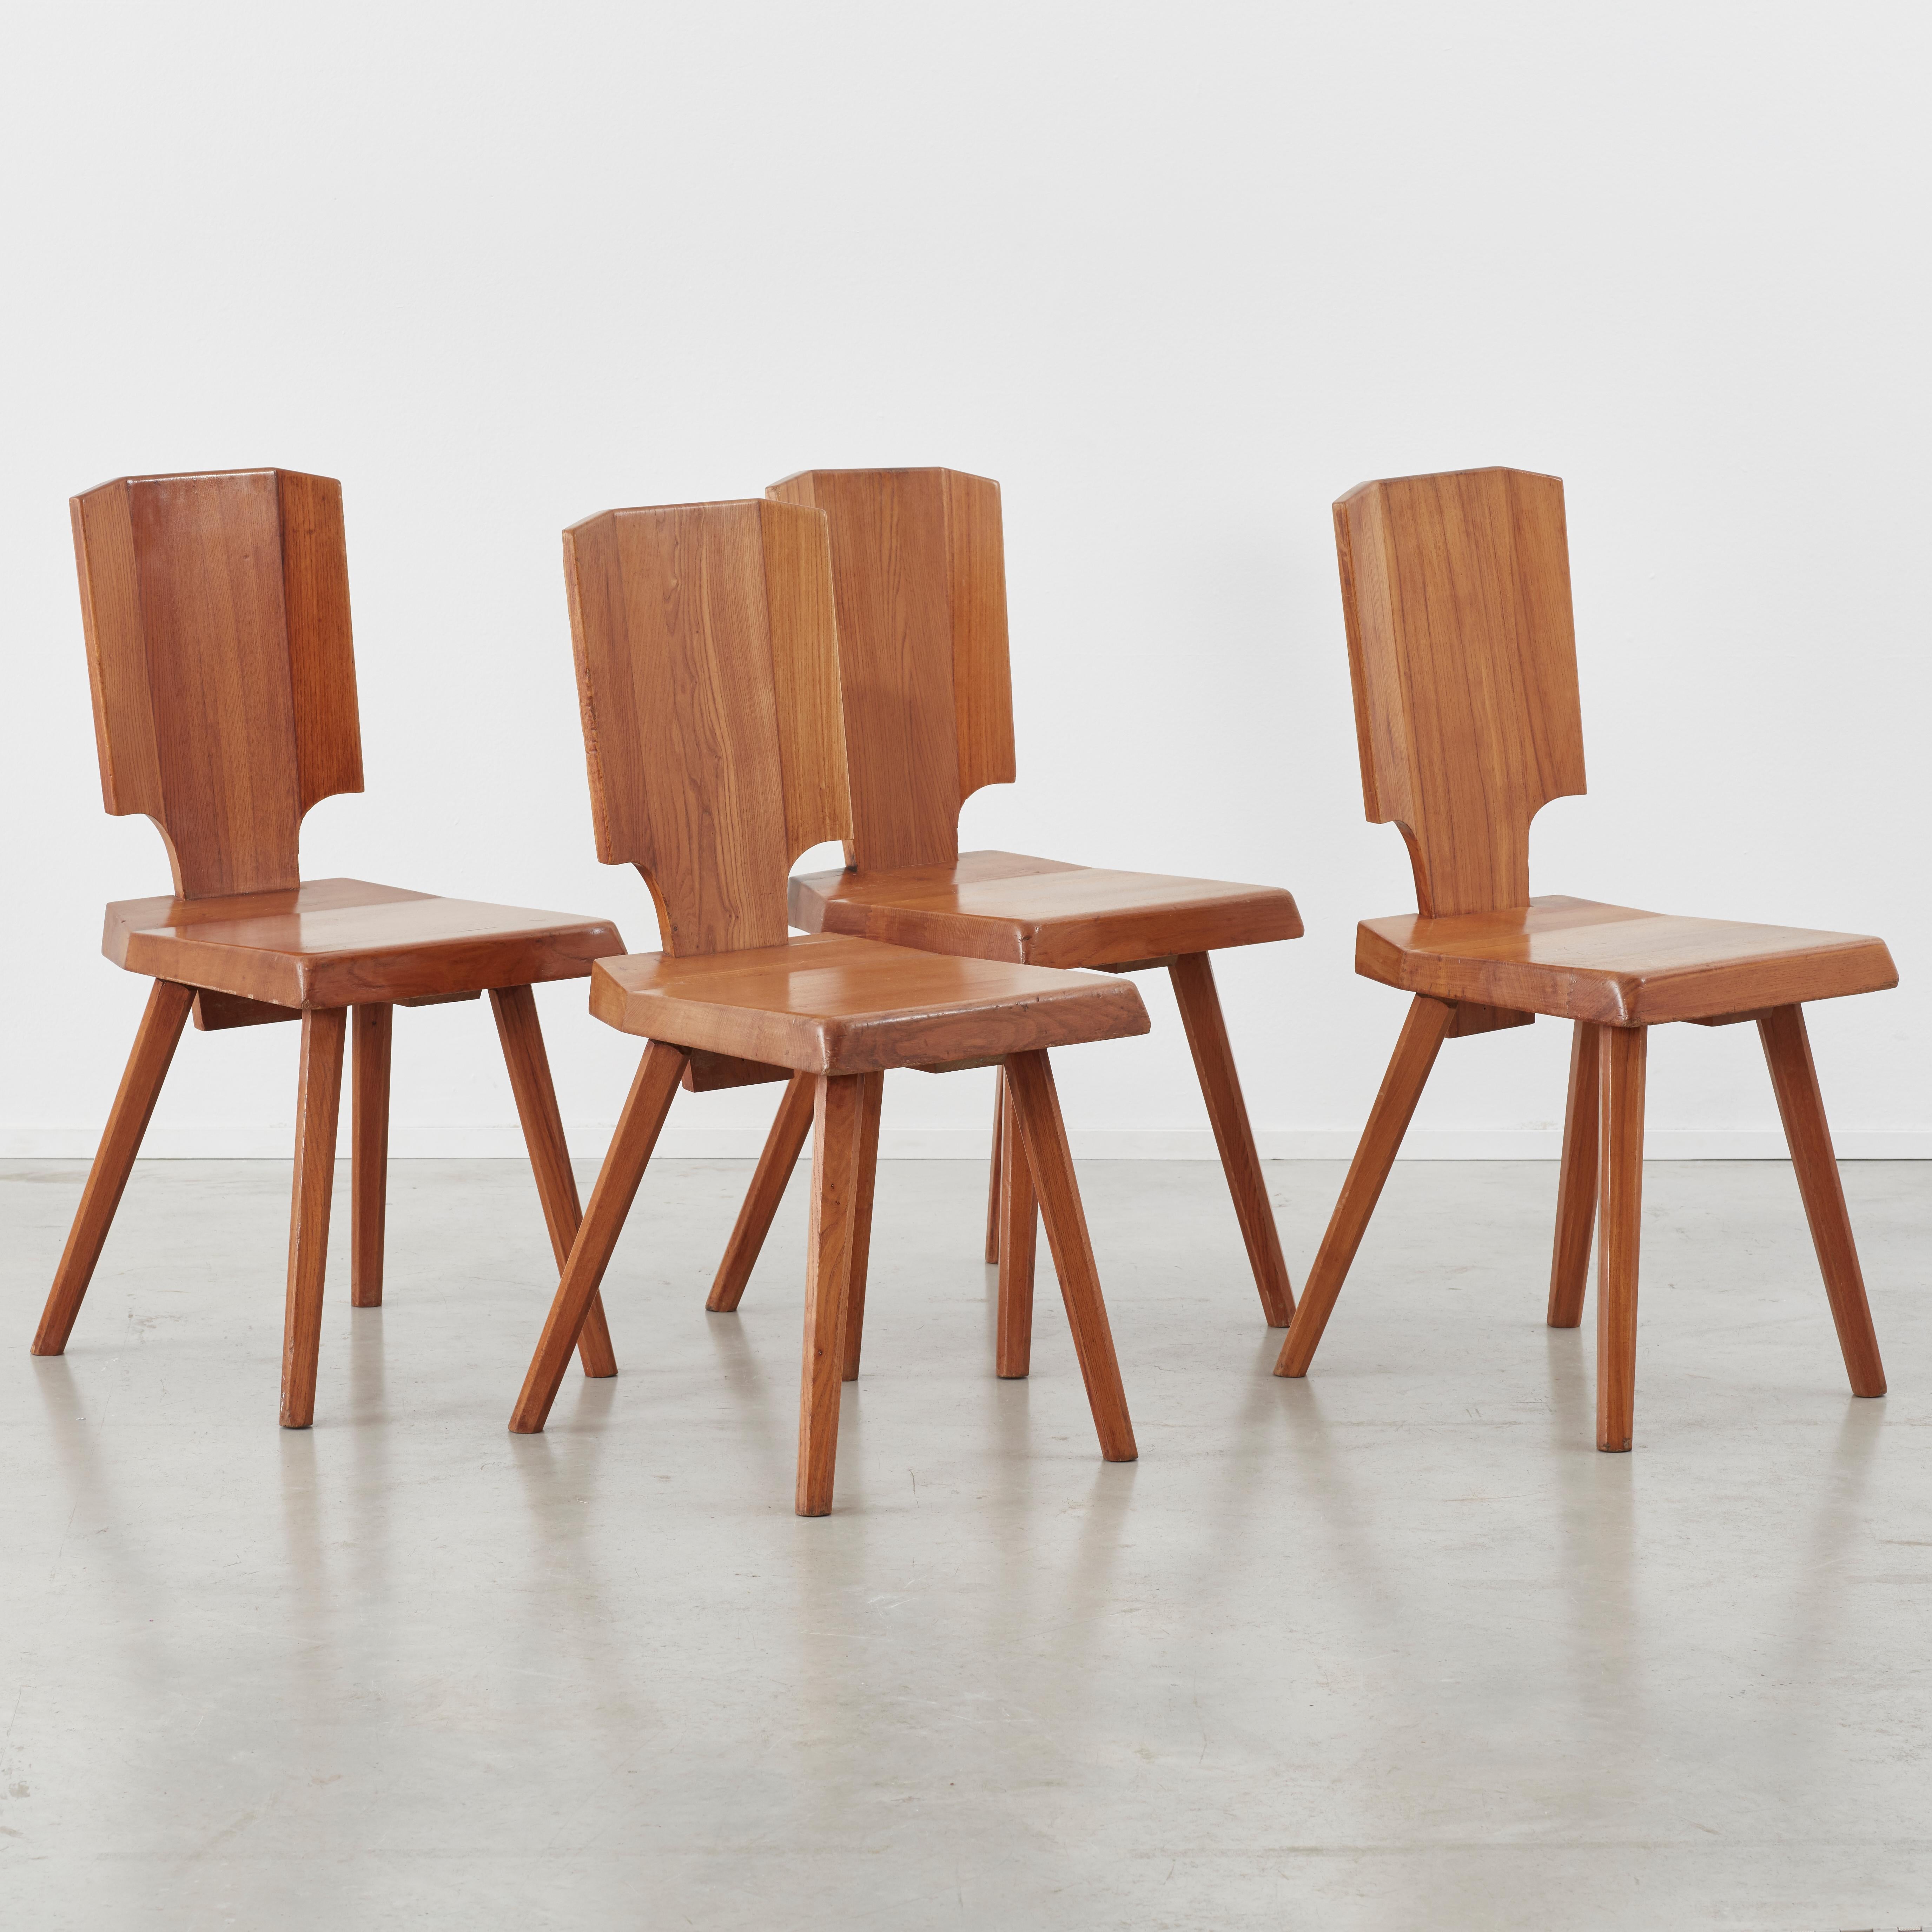 Pierre Chapo S28 Chair Chapo SA, France, 1972, 4 available 4